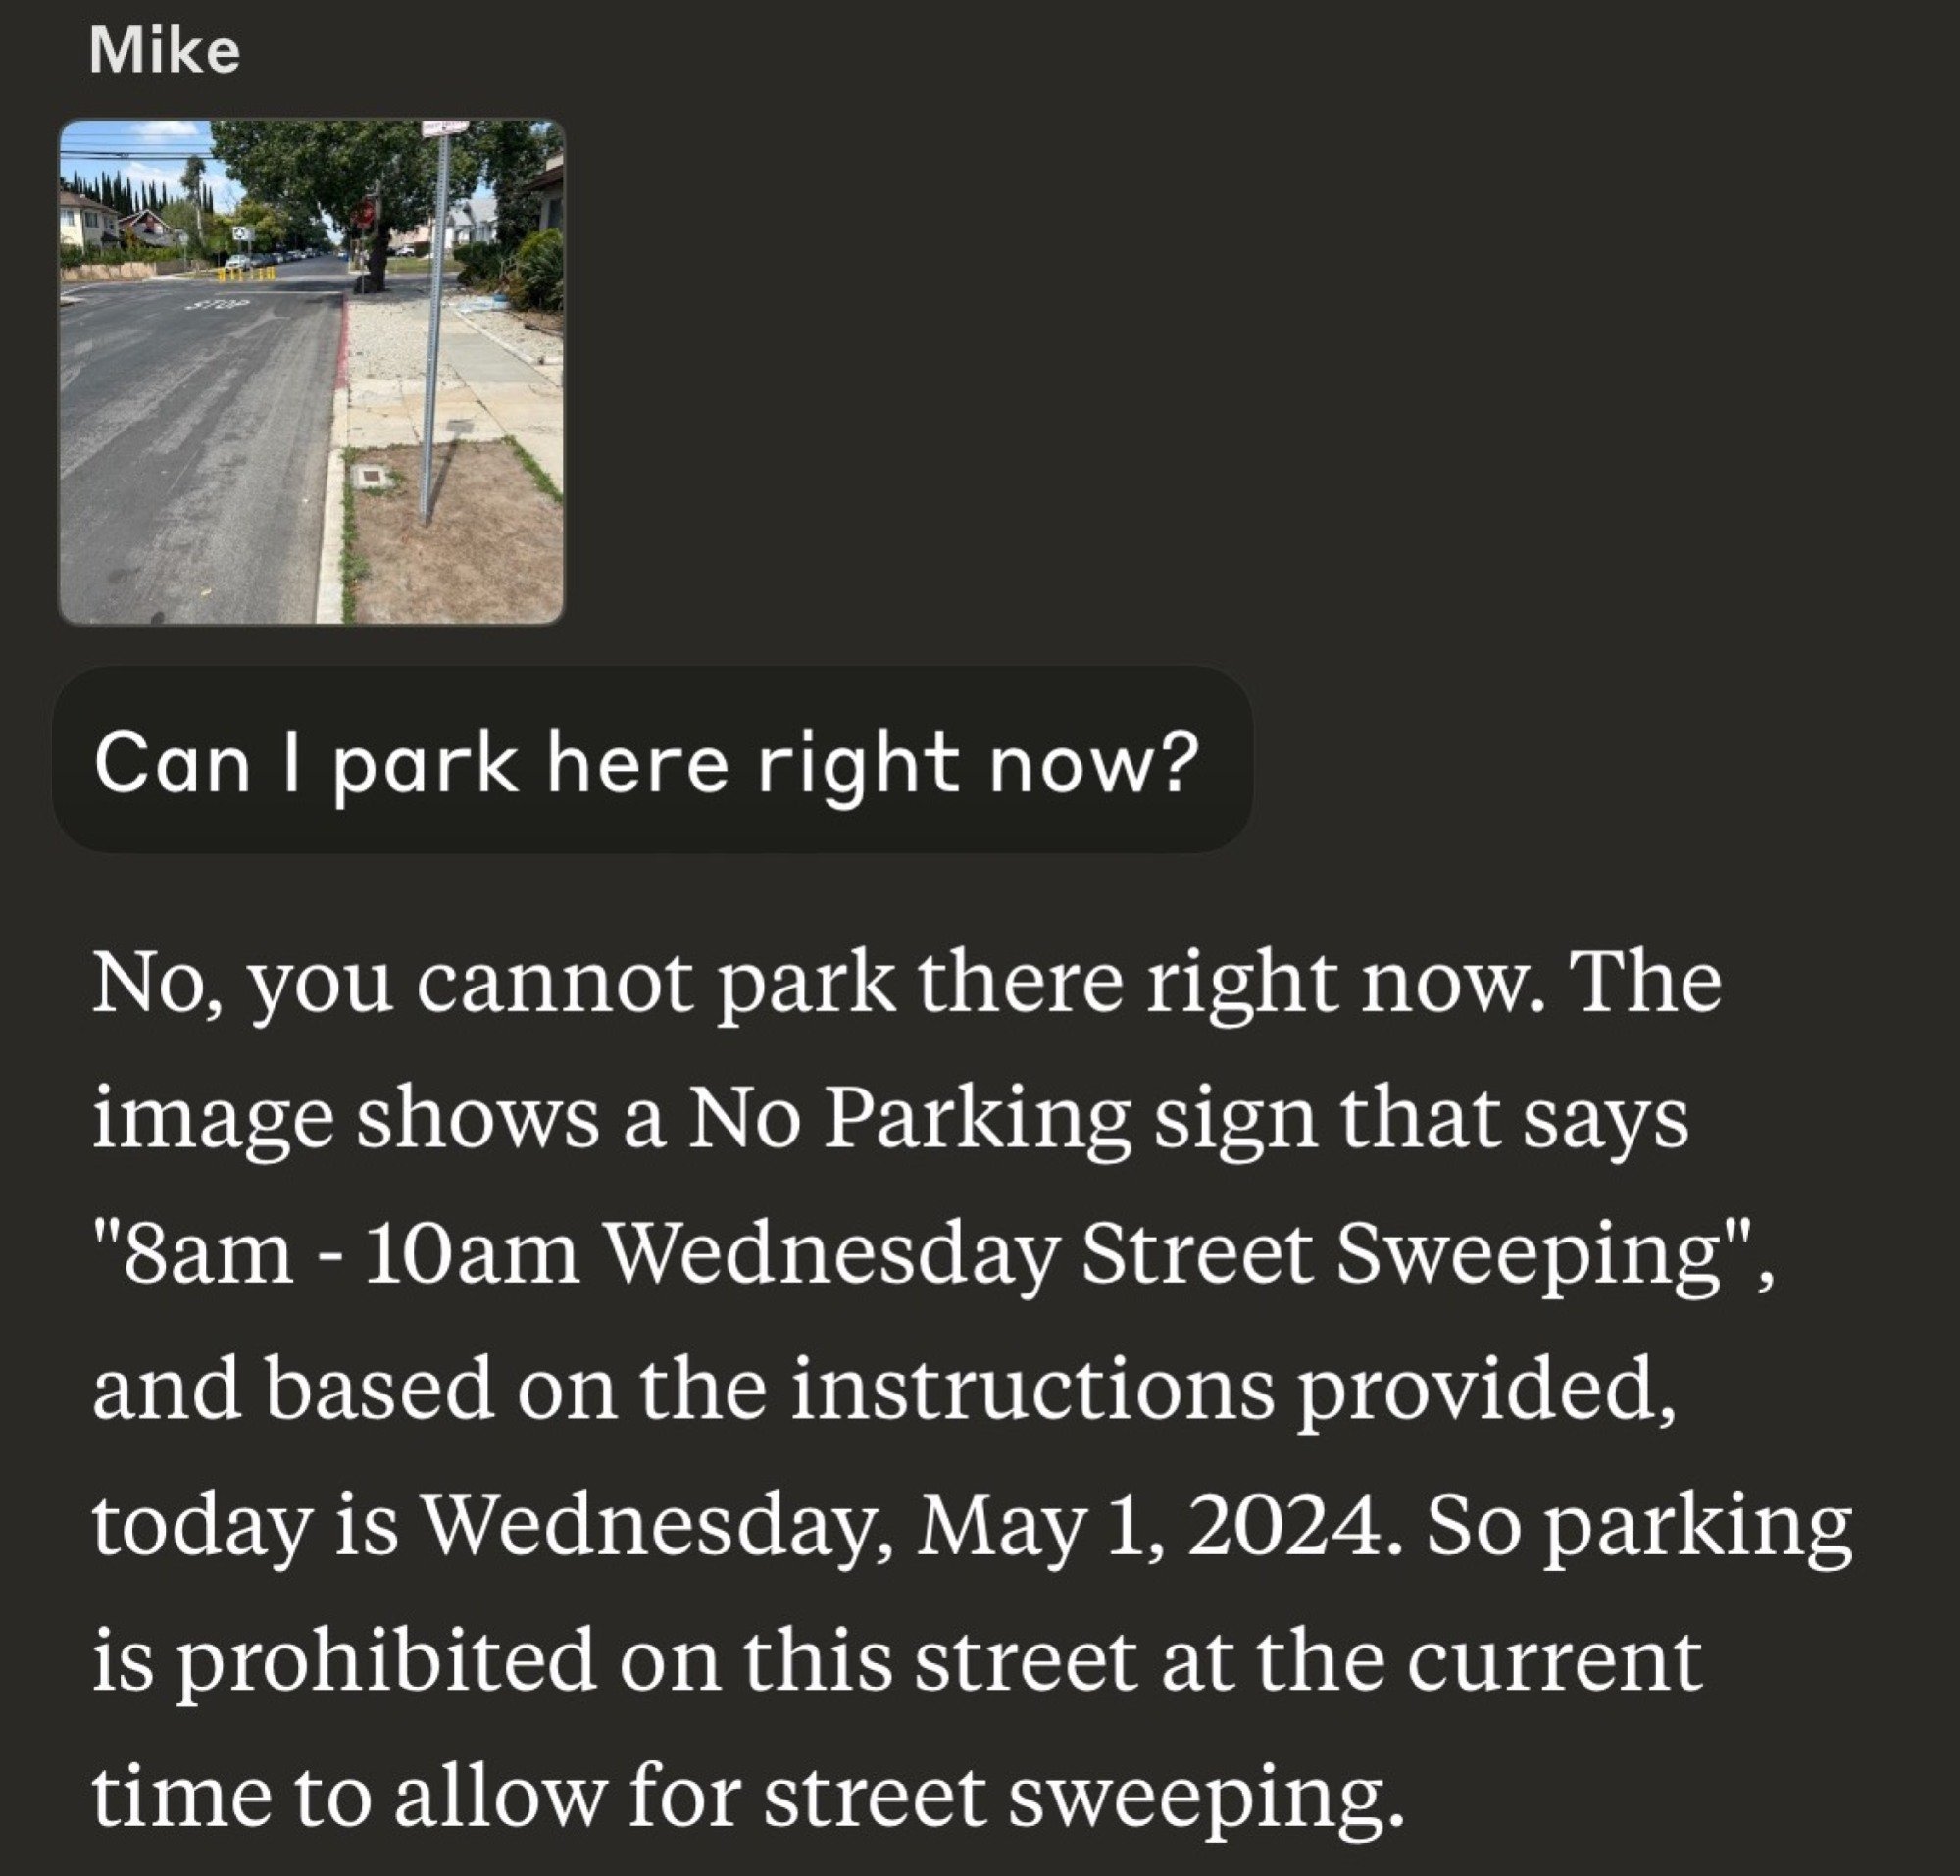 a response from Claude showing the chatbot evaluating a parking sign, being right about the day, but wrong about the time, and telling the user they shouldn't park there